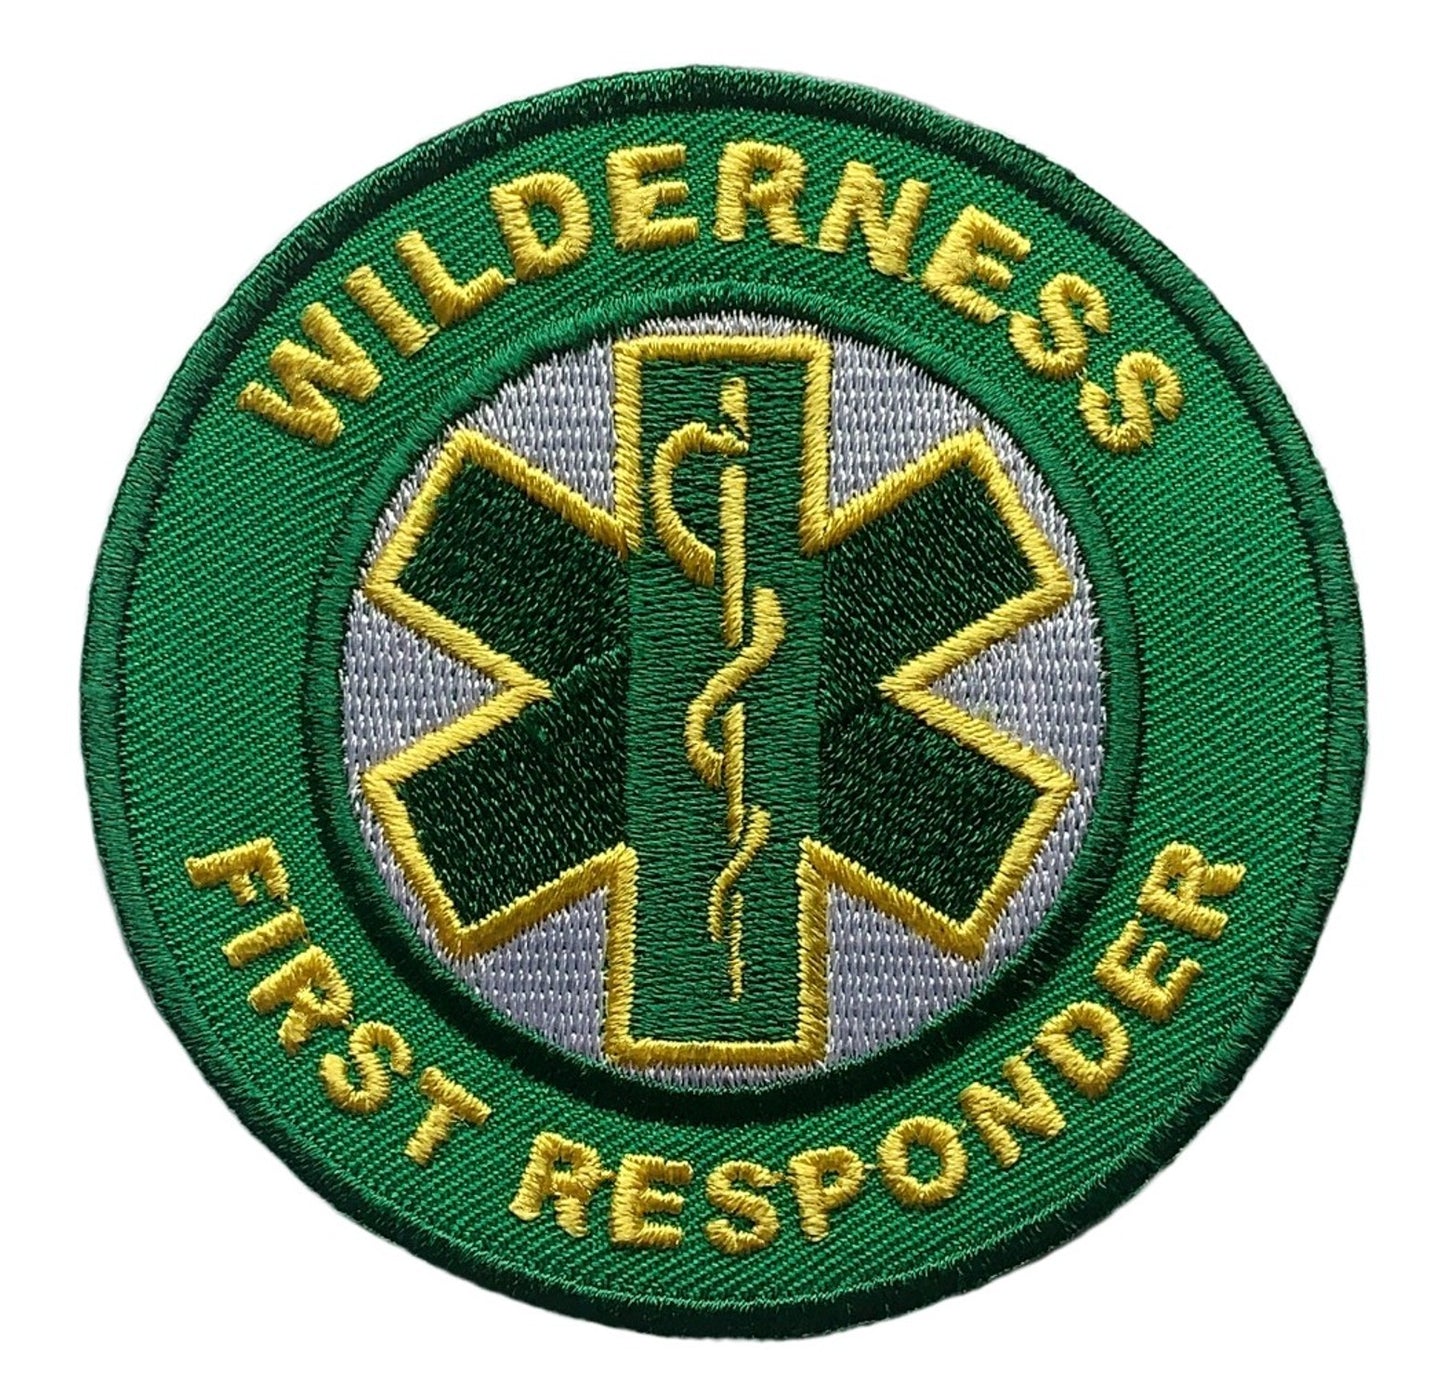 Wilderness First Responder Patch (3 Inch) Iron or Sew-on Badge Nature Outdoors Support DIY Gift Patches